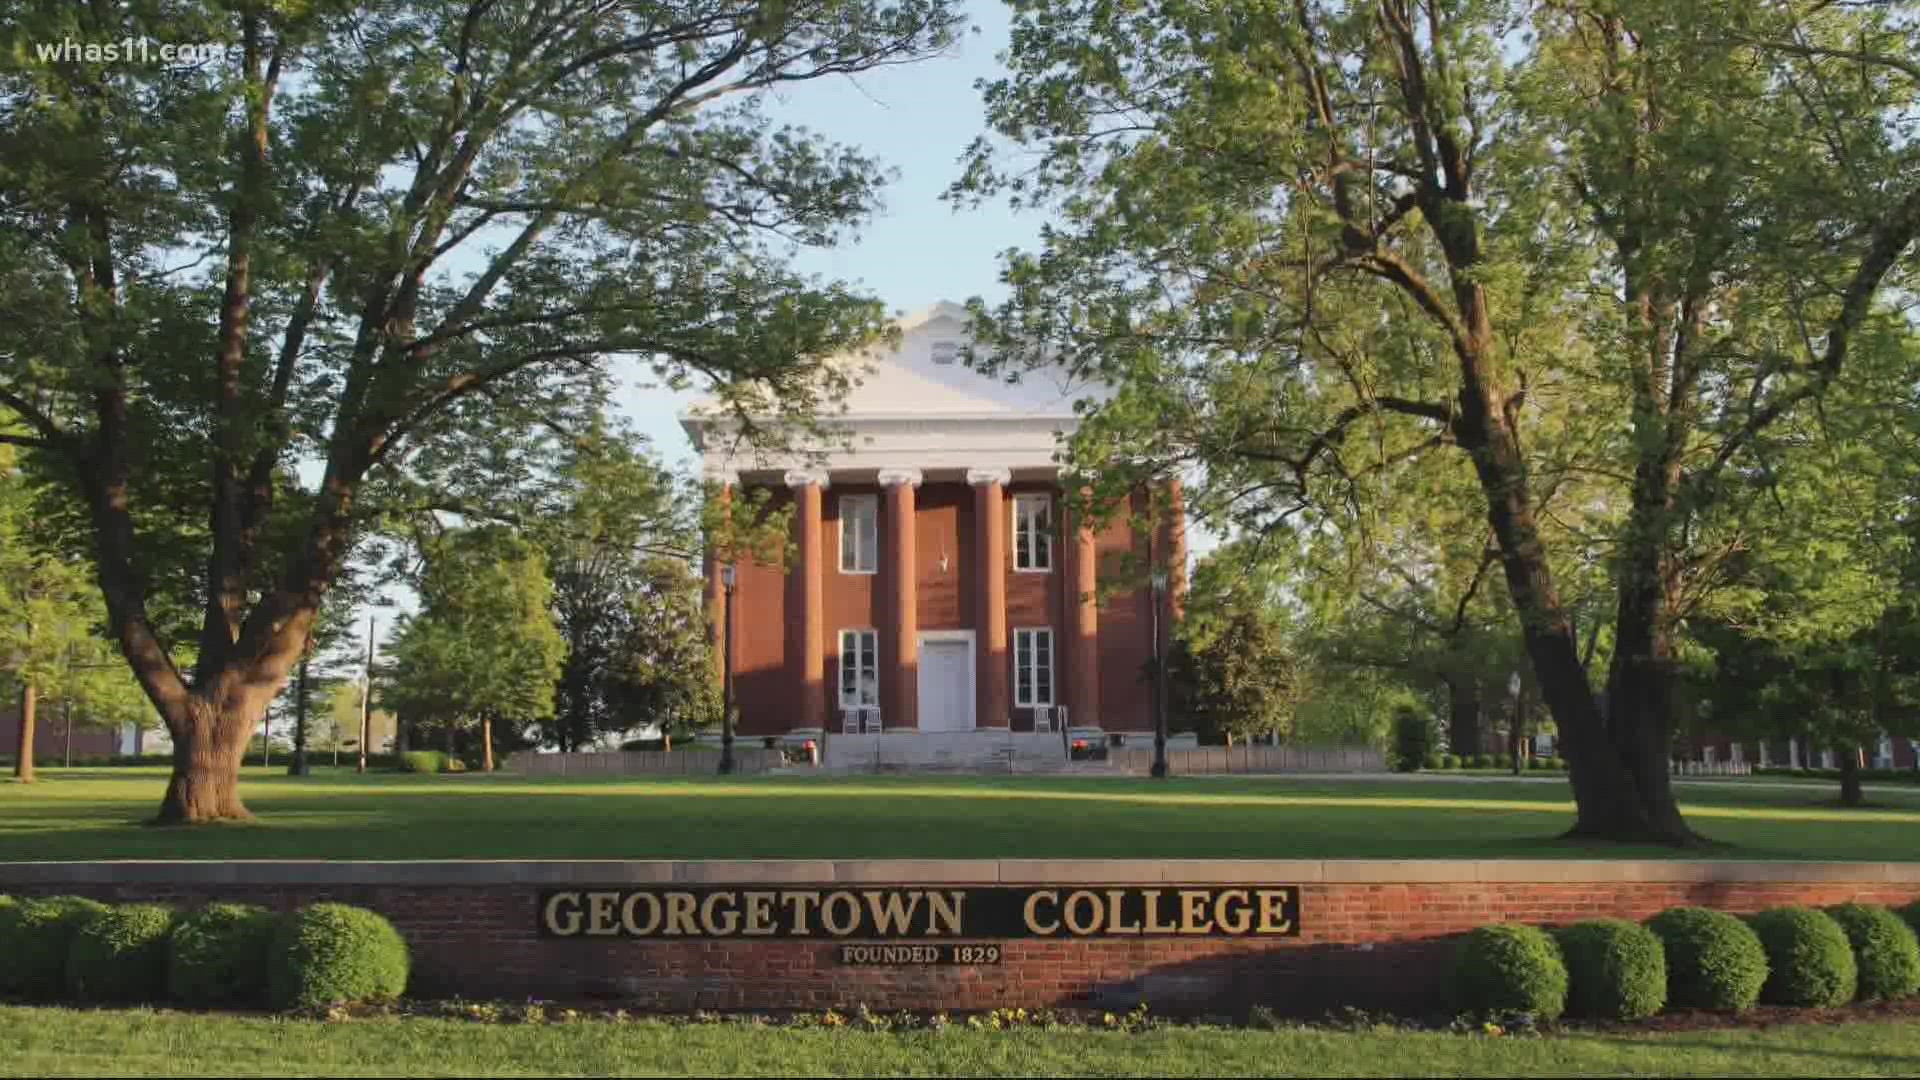 Kentucky's Georgetown College says it has fired the school's president, William Jones, after reports emerged accusing him of sexual assault and sexual misconduct.